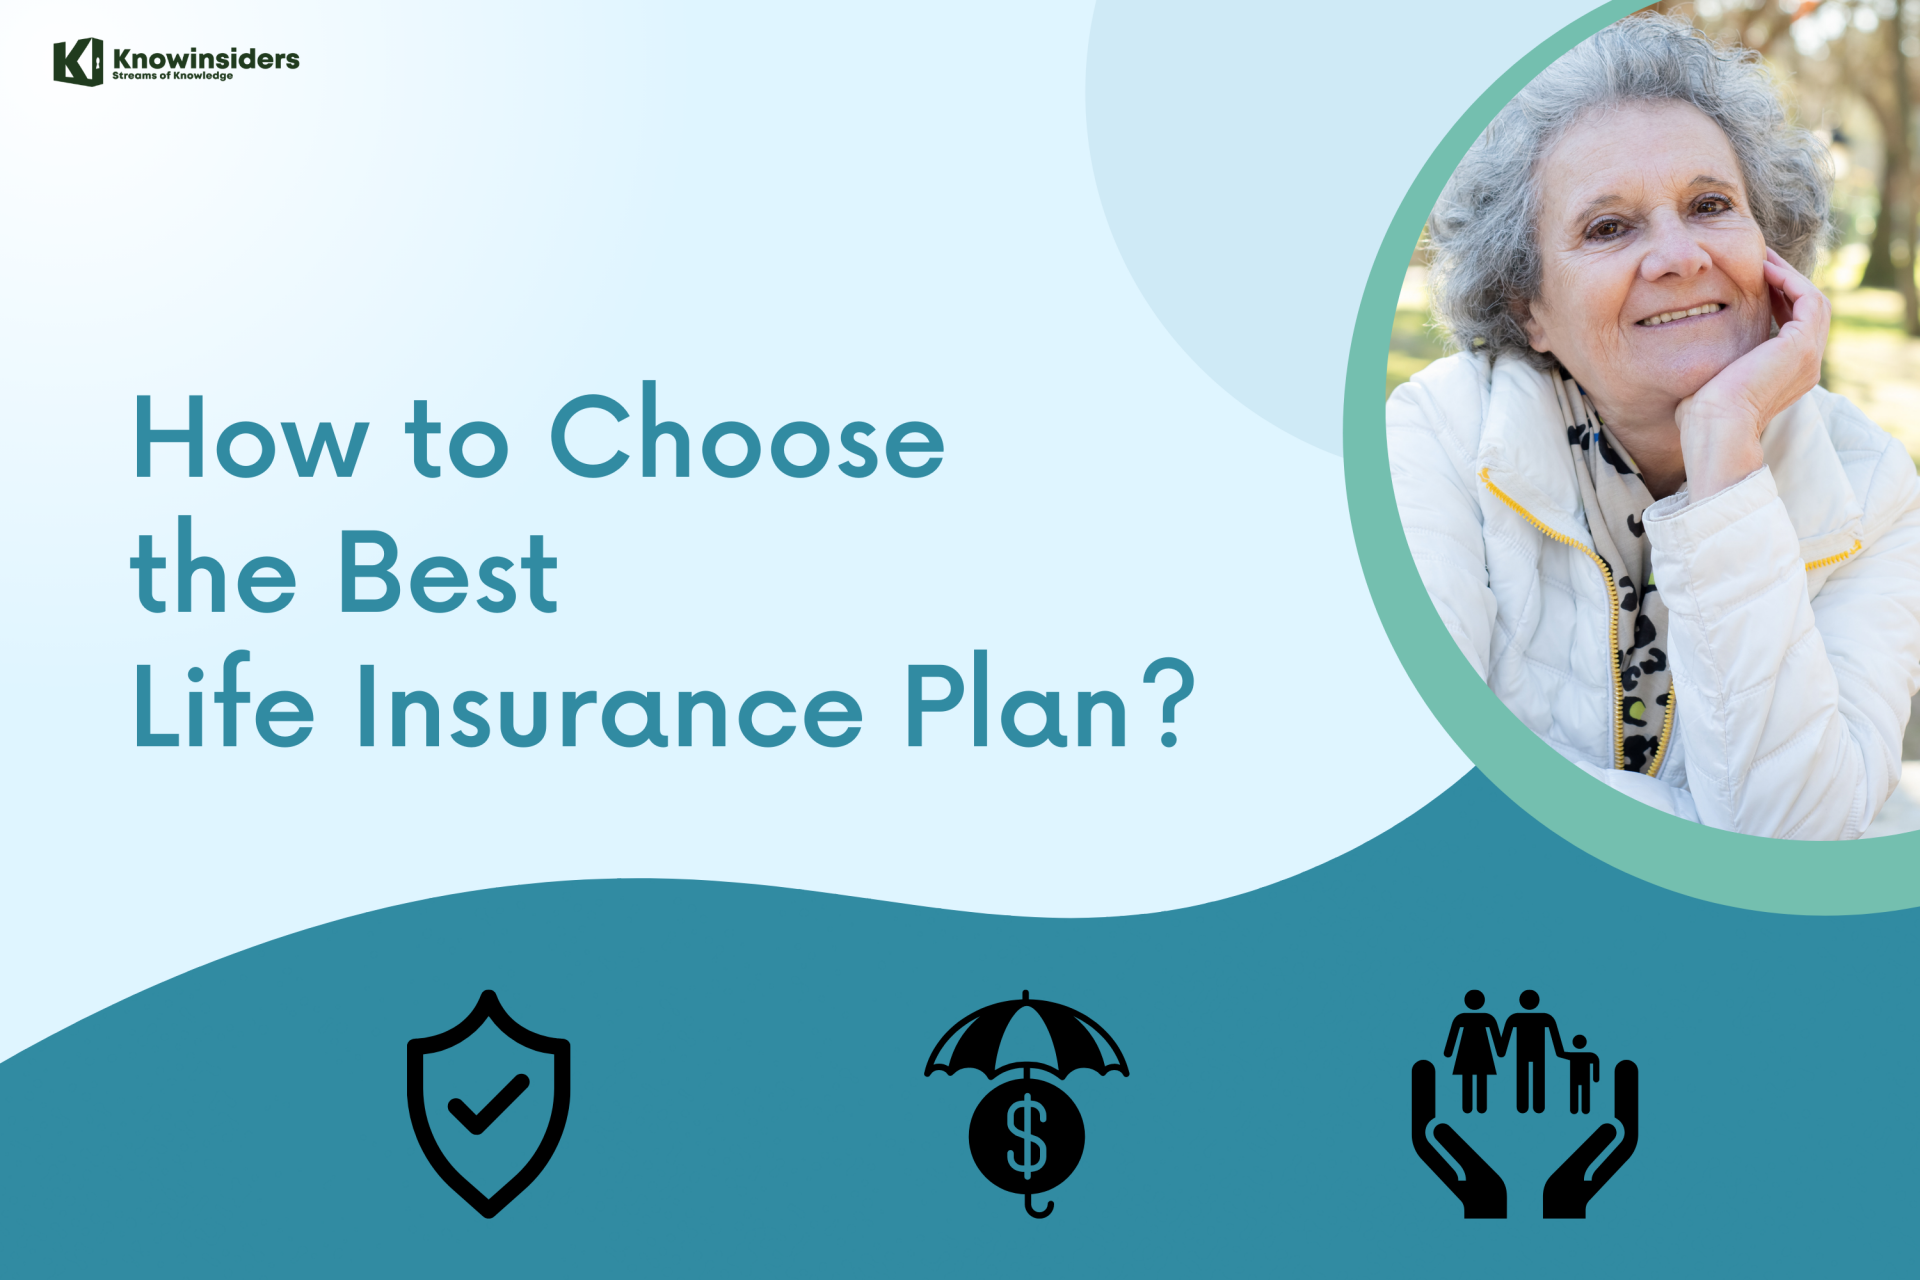 The Best Ways to Select the Right Life Insurance Plan and Company